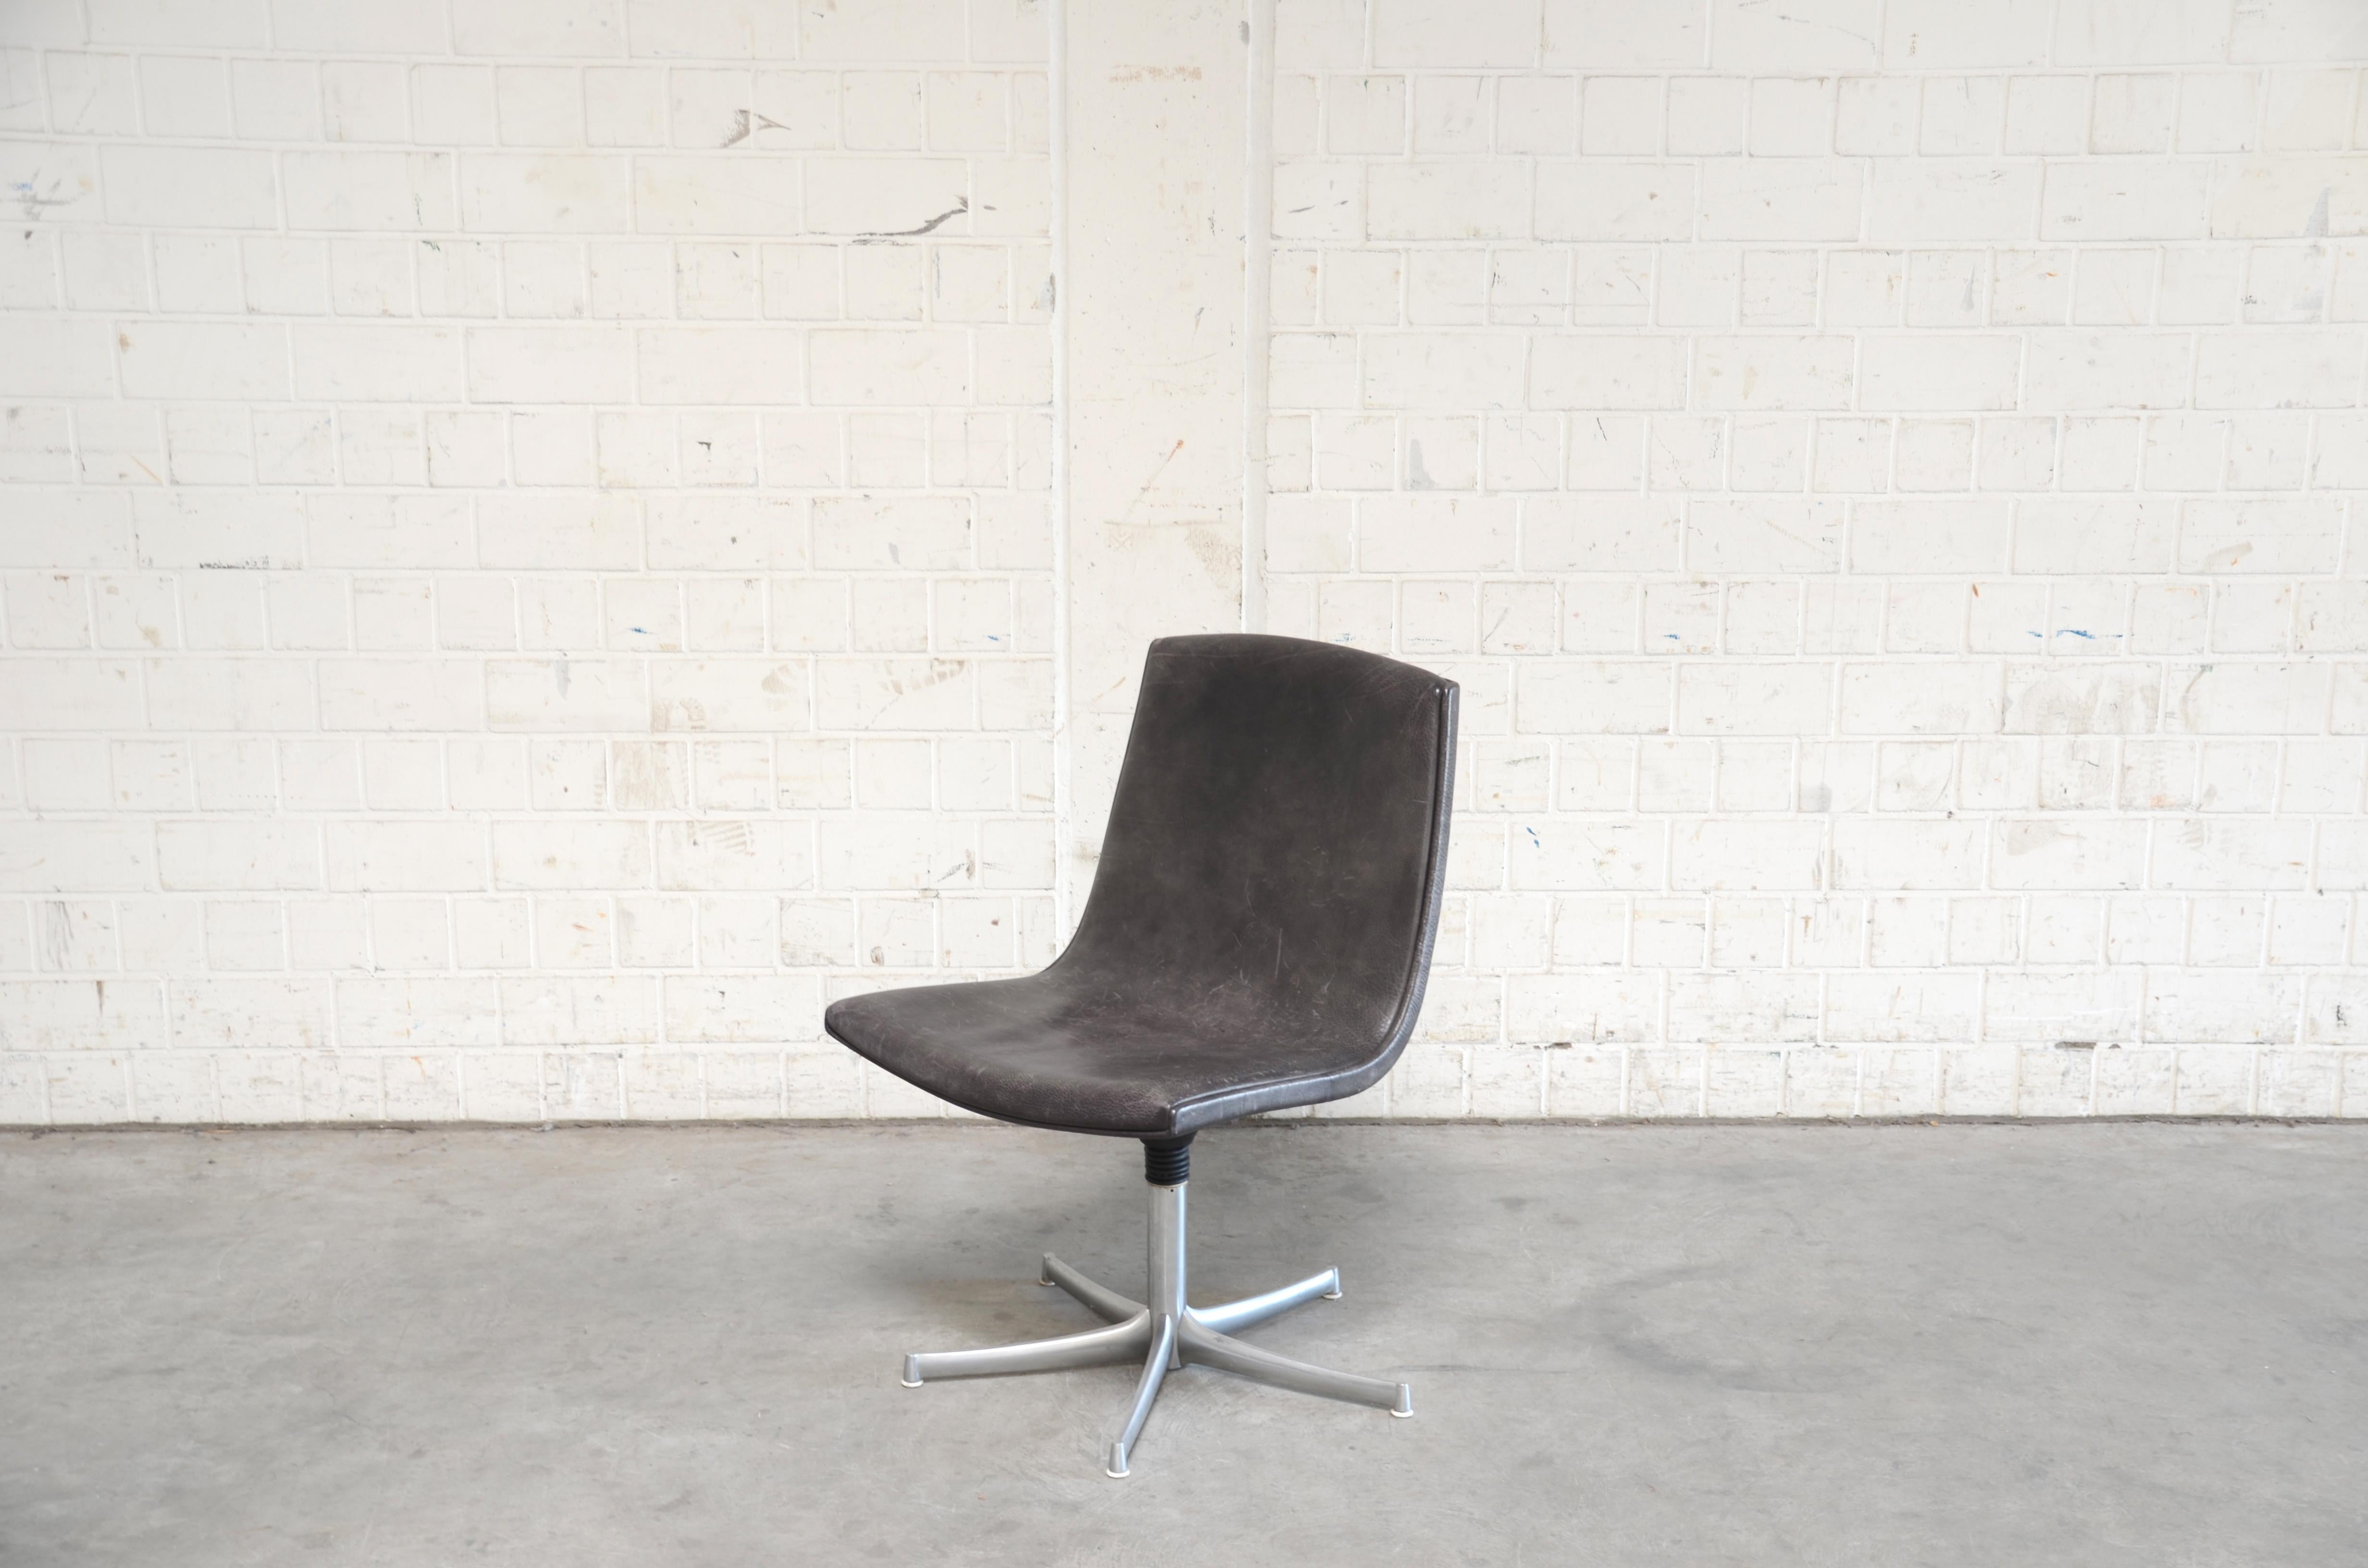 Bernd Münzebrock designed this office chair model Logos for Walter Knoll
The seat is made of strong thick brown neckleather, the quality as known from De Sede.
  